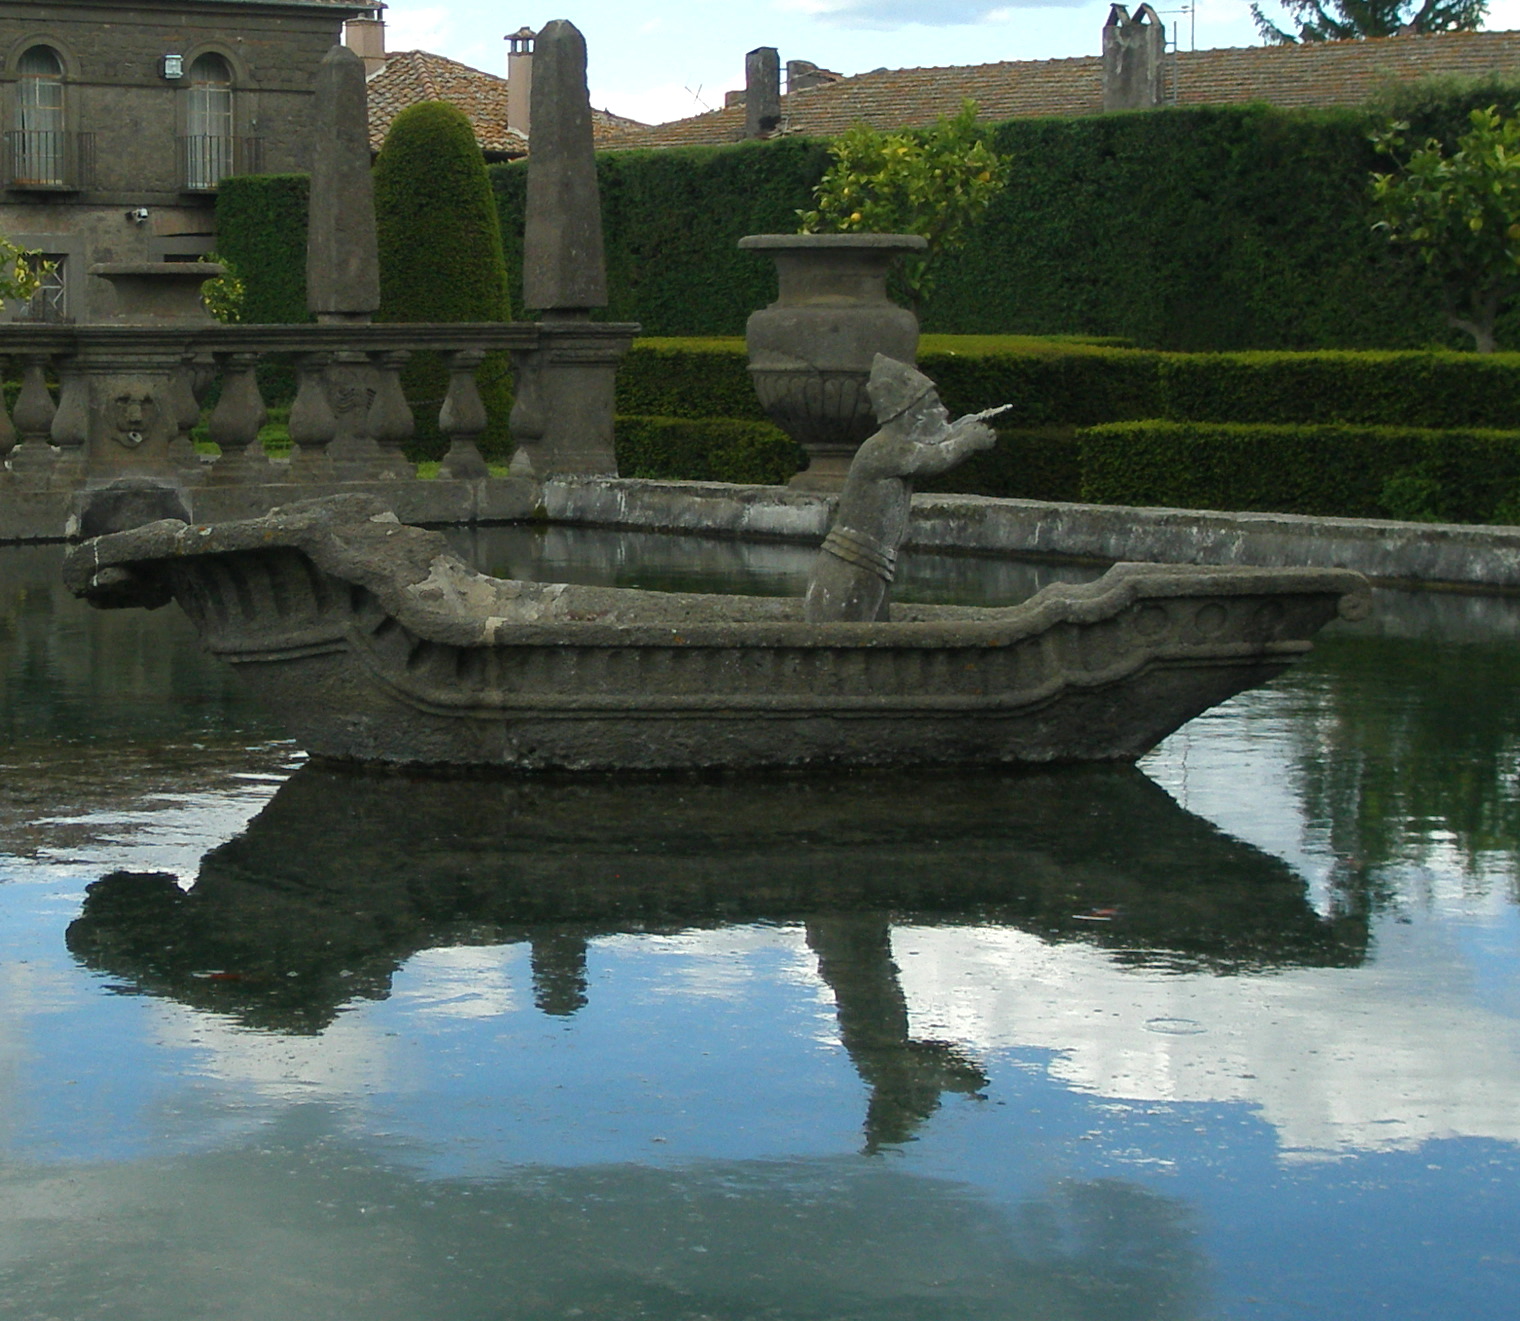 One of the four (very cool) Stone Boats, which adorn the pools around the Island.